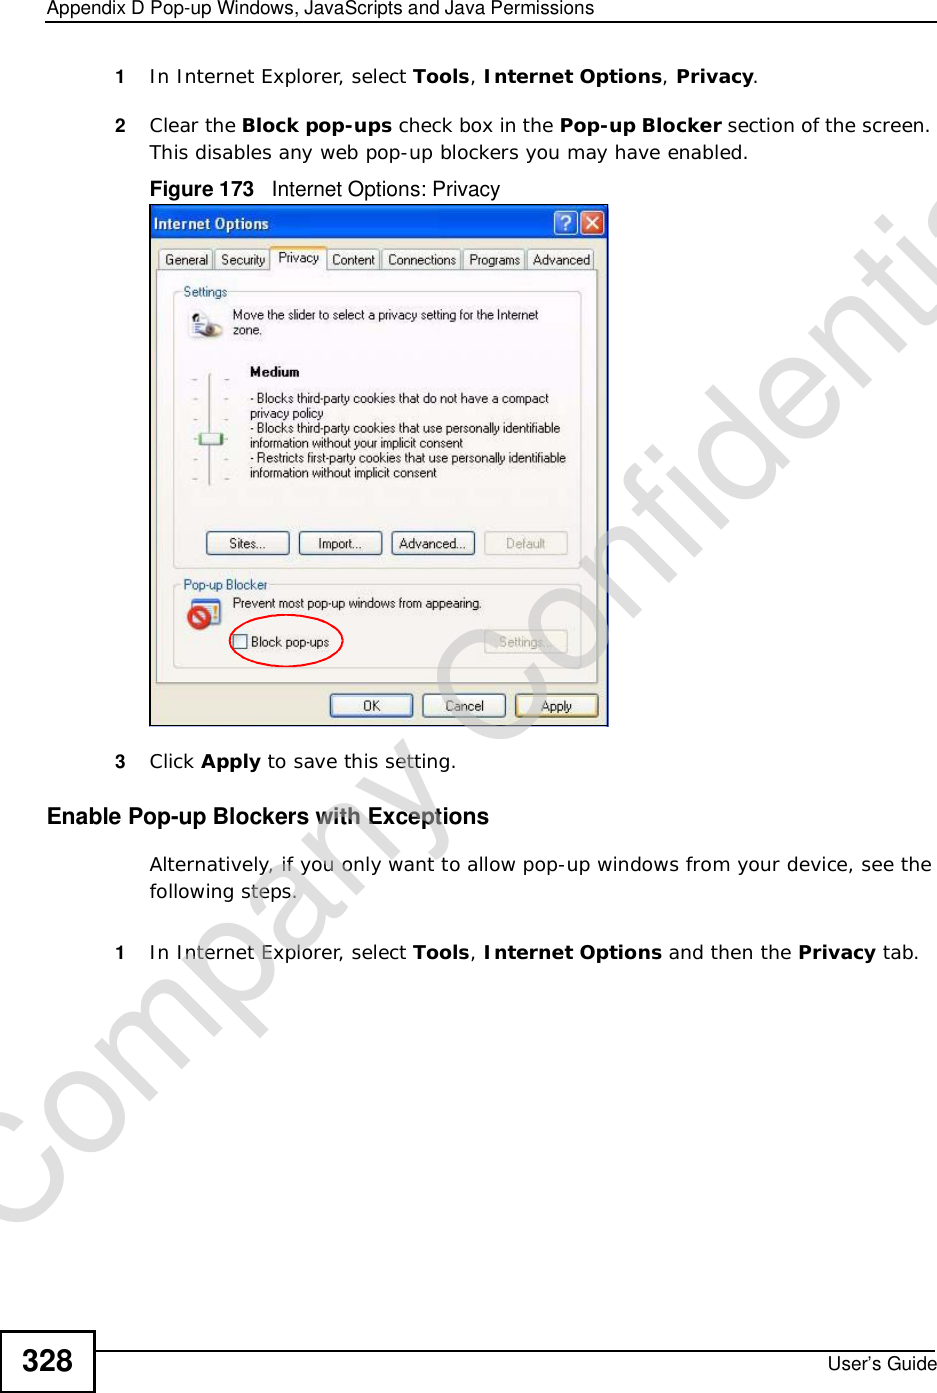 Appendix DPop-up Windows, JavaScripts and Java PermissionsUser’s Guide3281In Internet Explorer, select Tools,Internet Options,Privacy.2Clear the Block pop-ups check box in the Pop-up Blocker section of the screen. This disables any web pop-up blockers you may have enabled. Figure 173   Internet Options: Privacy3Click Apply to save this setting.Enable Pop-up Blockers with ExceptionsAlternatively, if you only want to allow pop-up windows from your device, see the following steps.1In Internet Explorer, select Tools,Internet Options and then the Privacy tab. Company Confidential